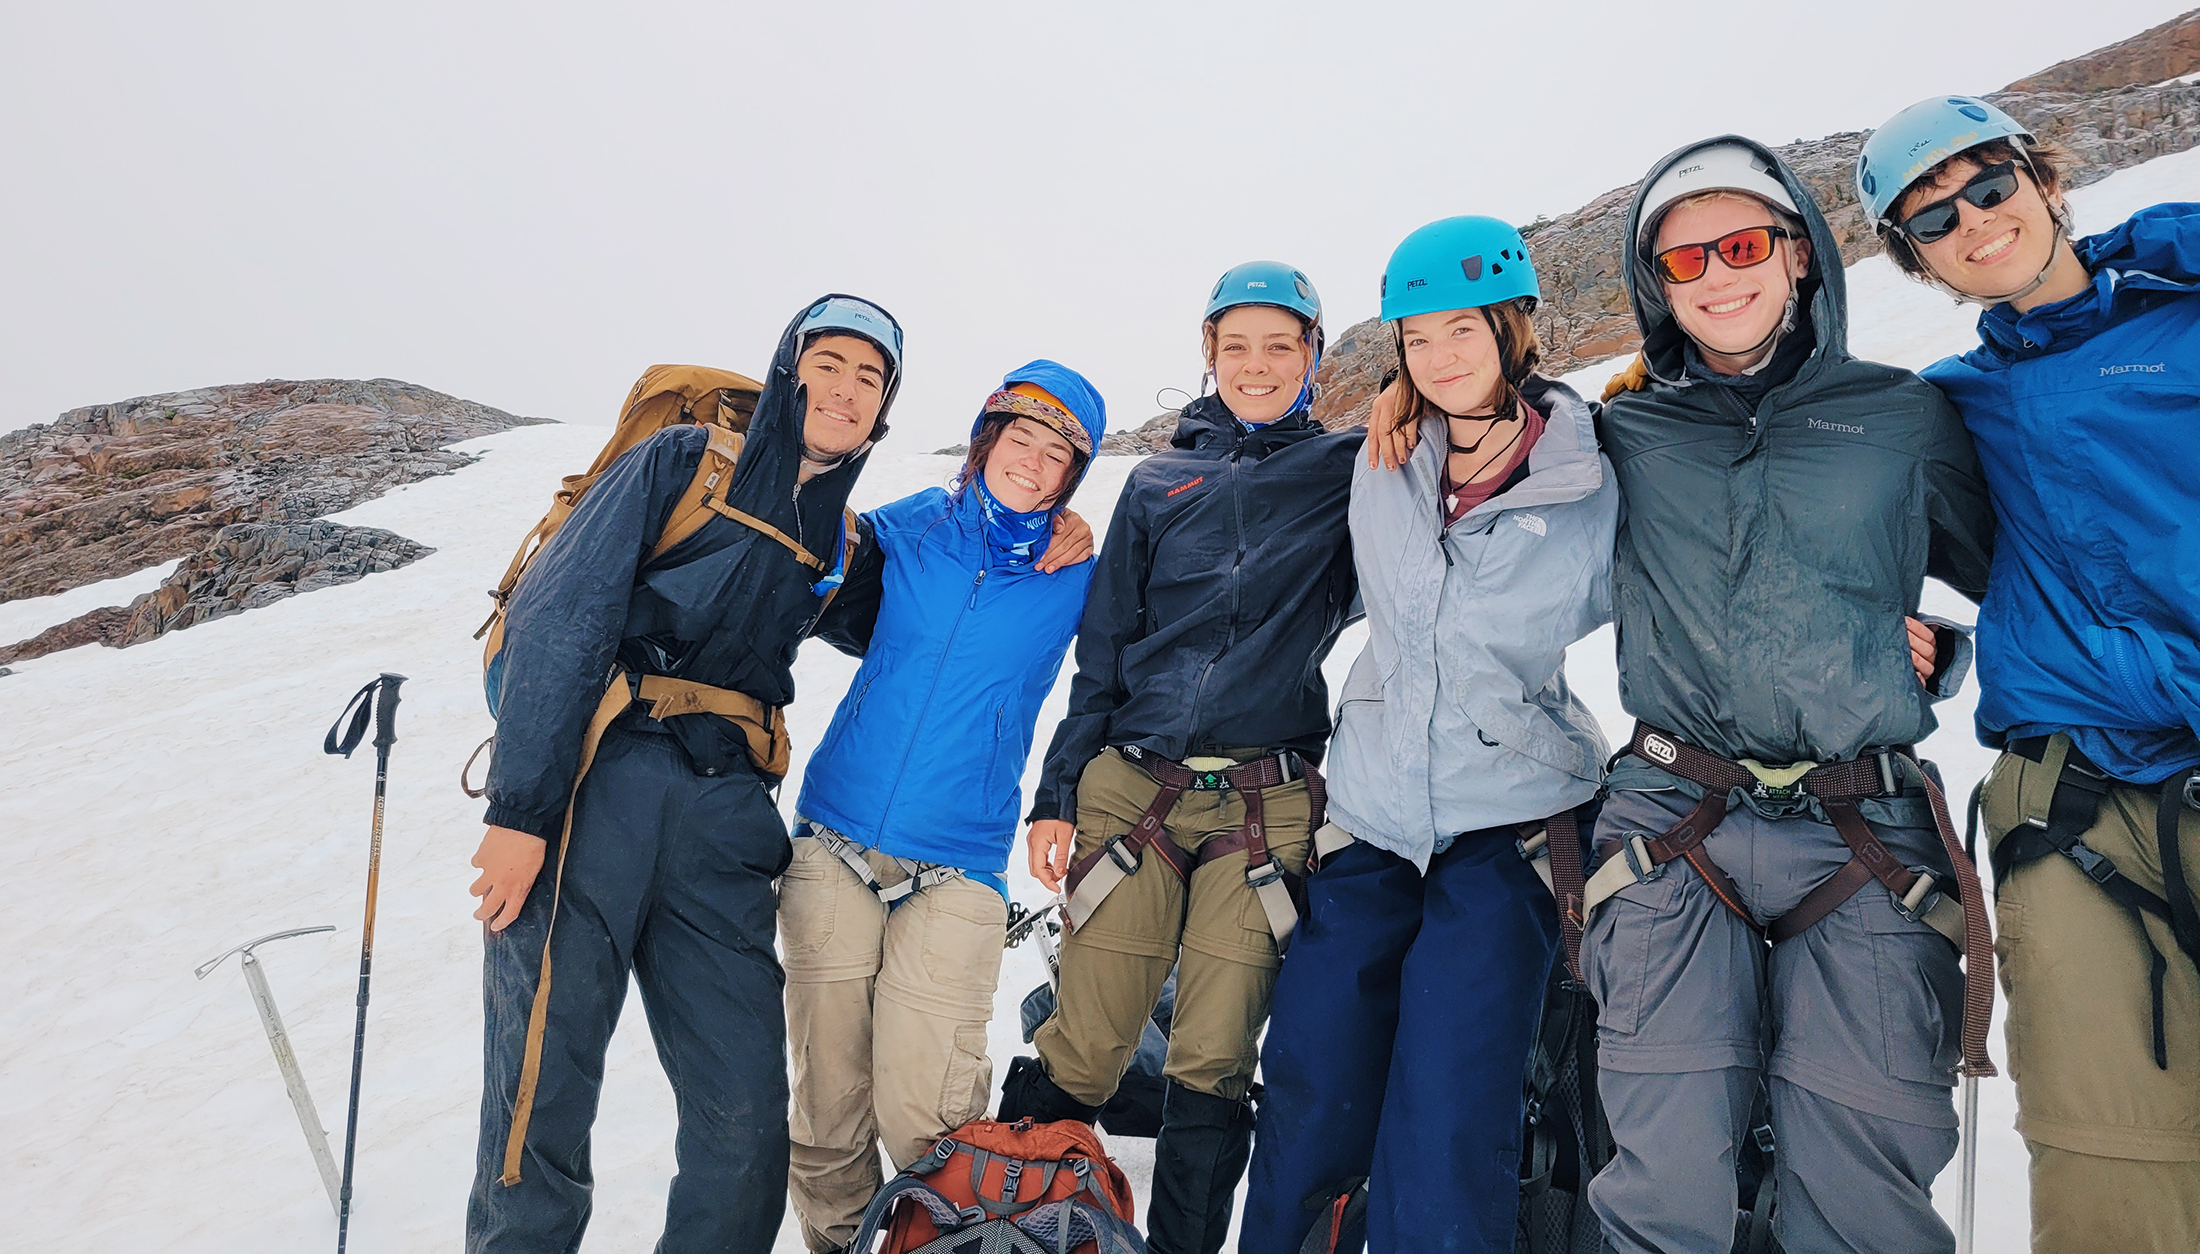 Six people mountaineering smiling together. 